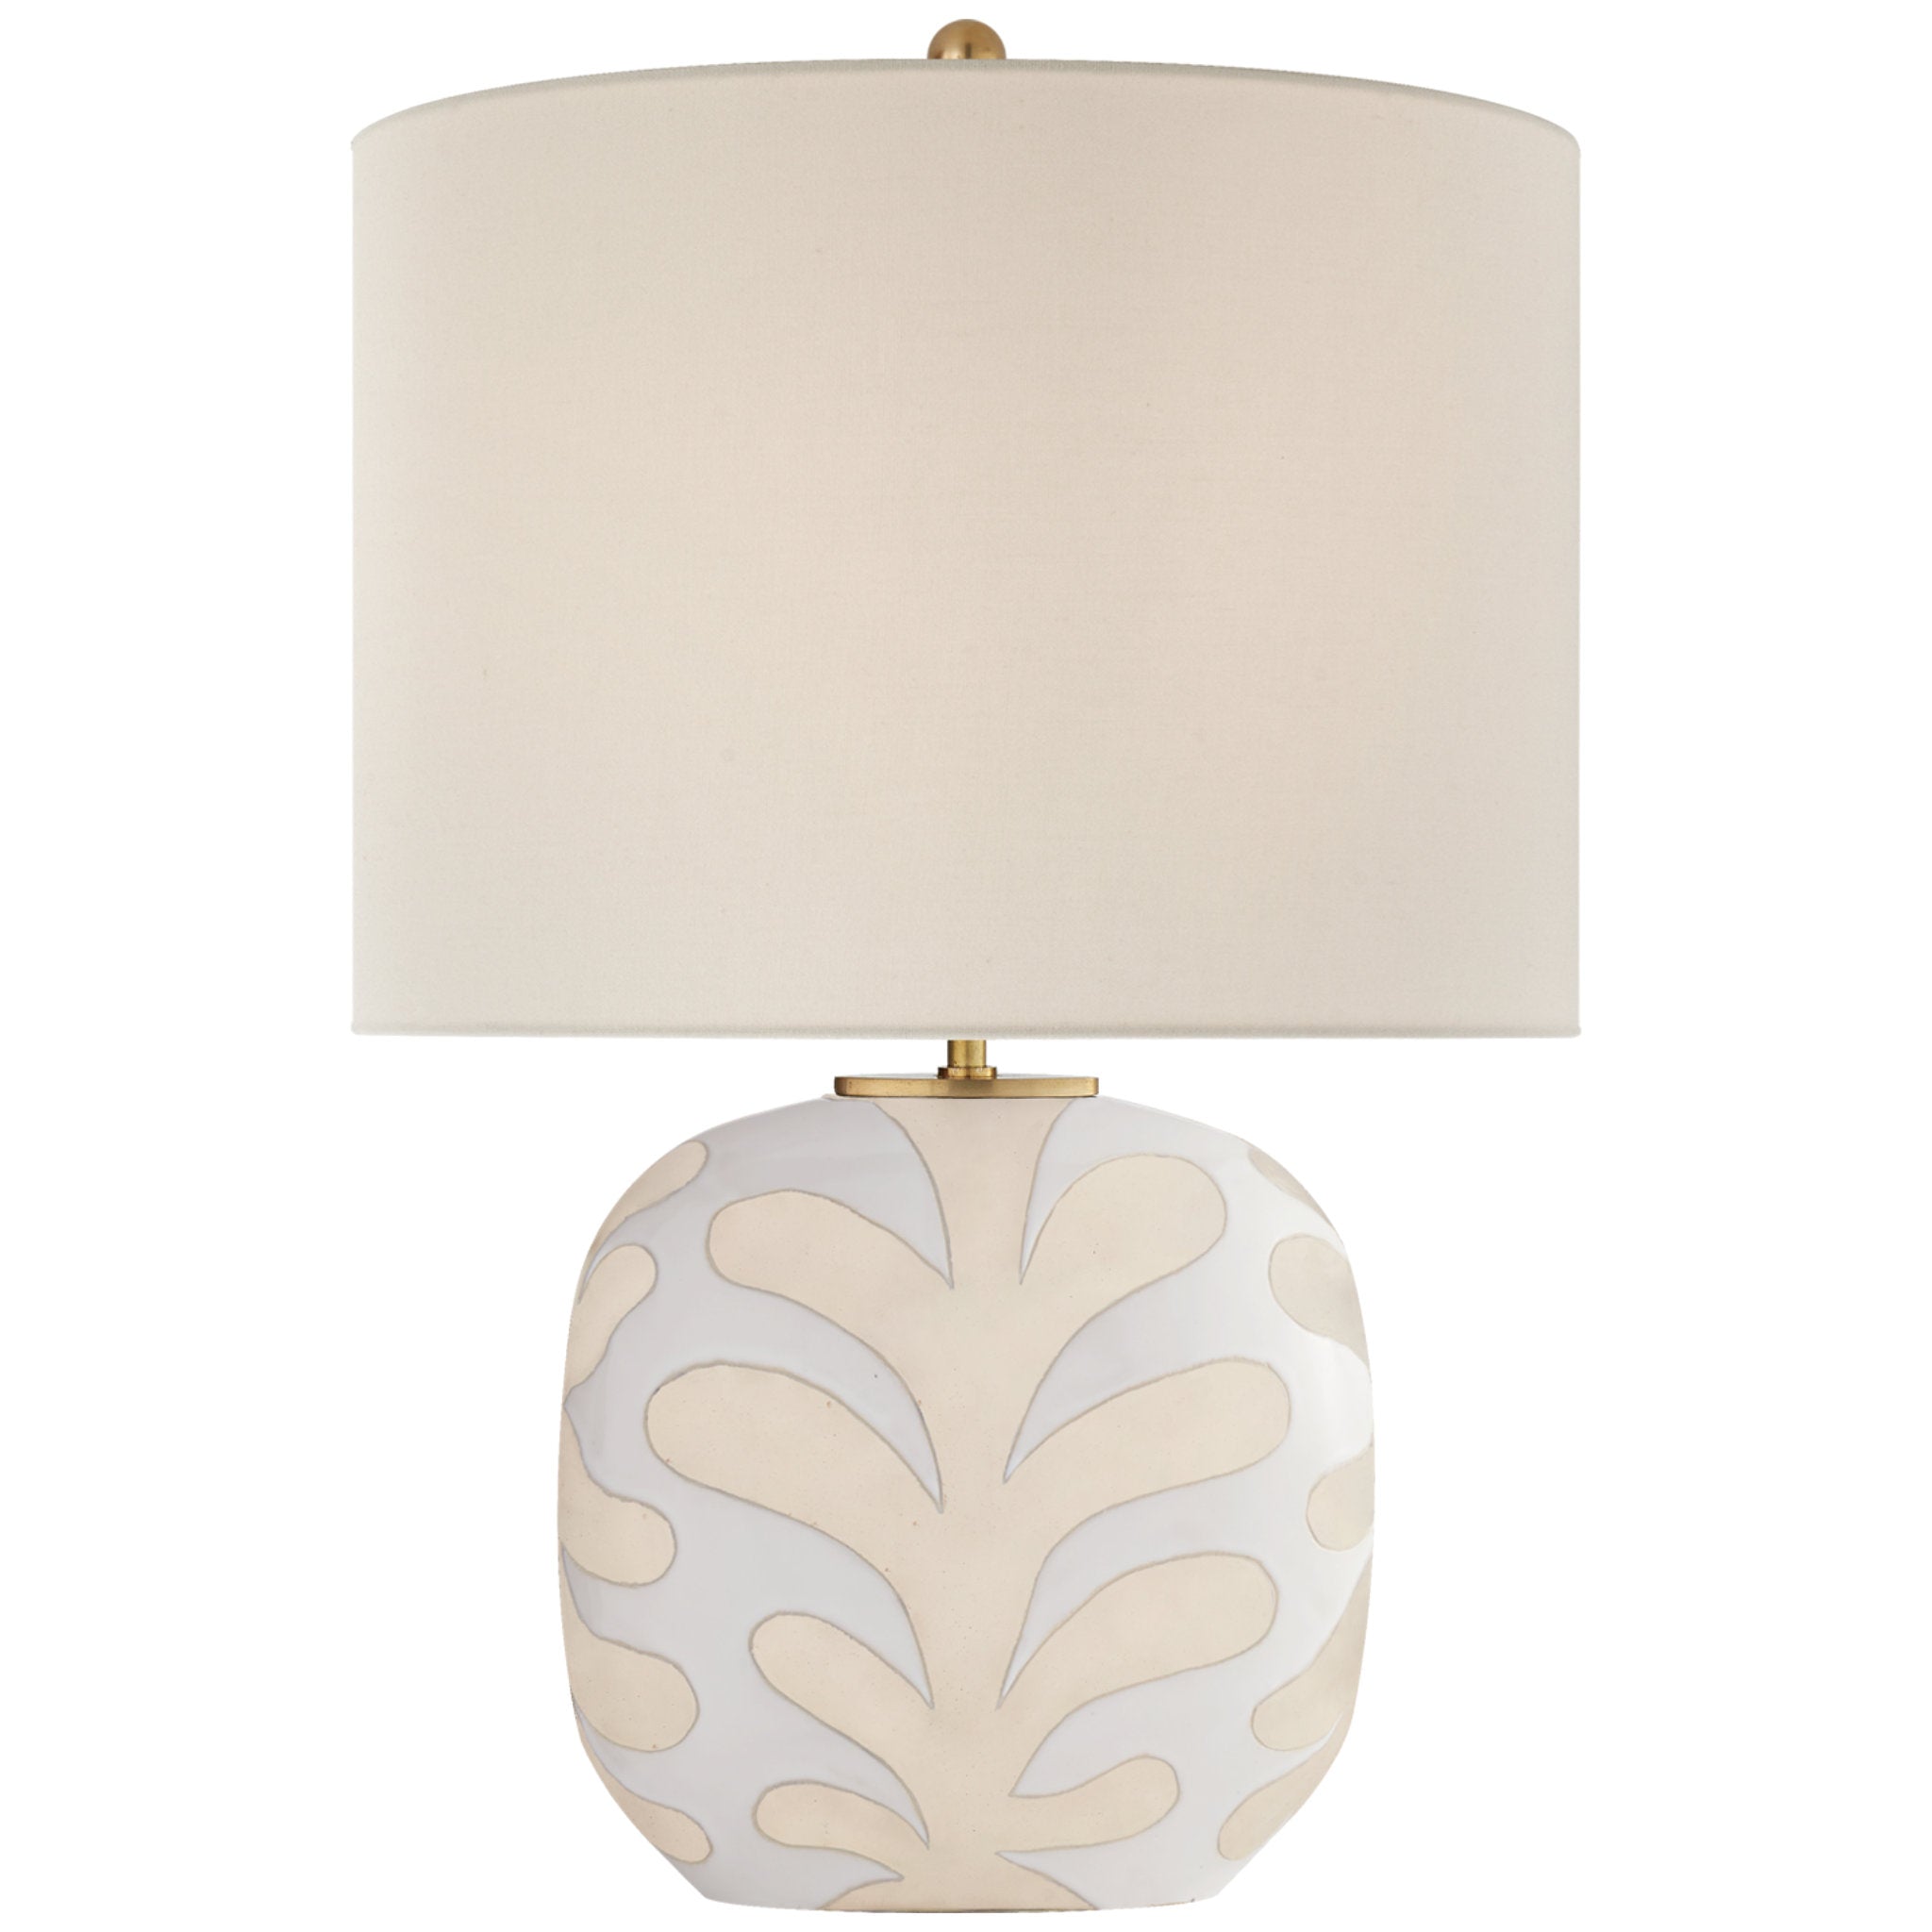 kate spade new york Parkwood Medium Table Lamp in Natural Bisque and New White with Linen Shade